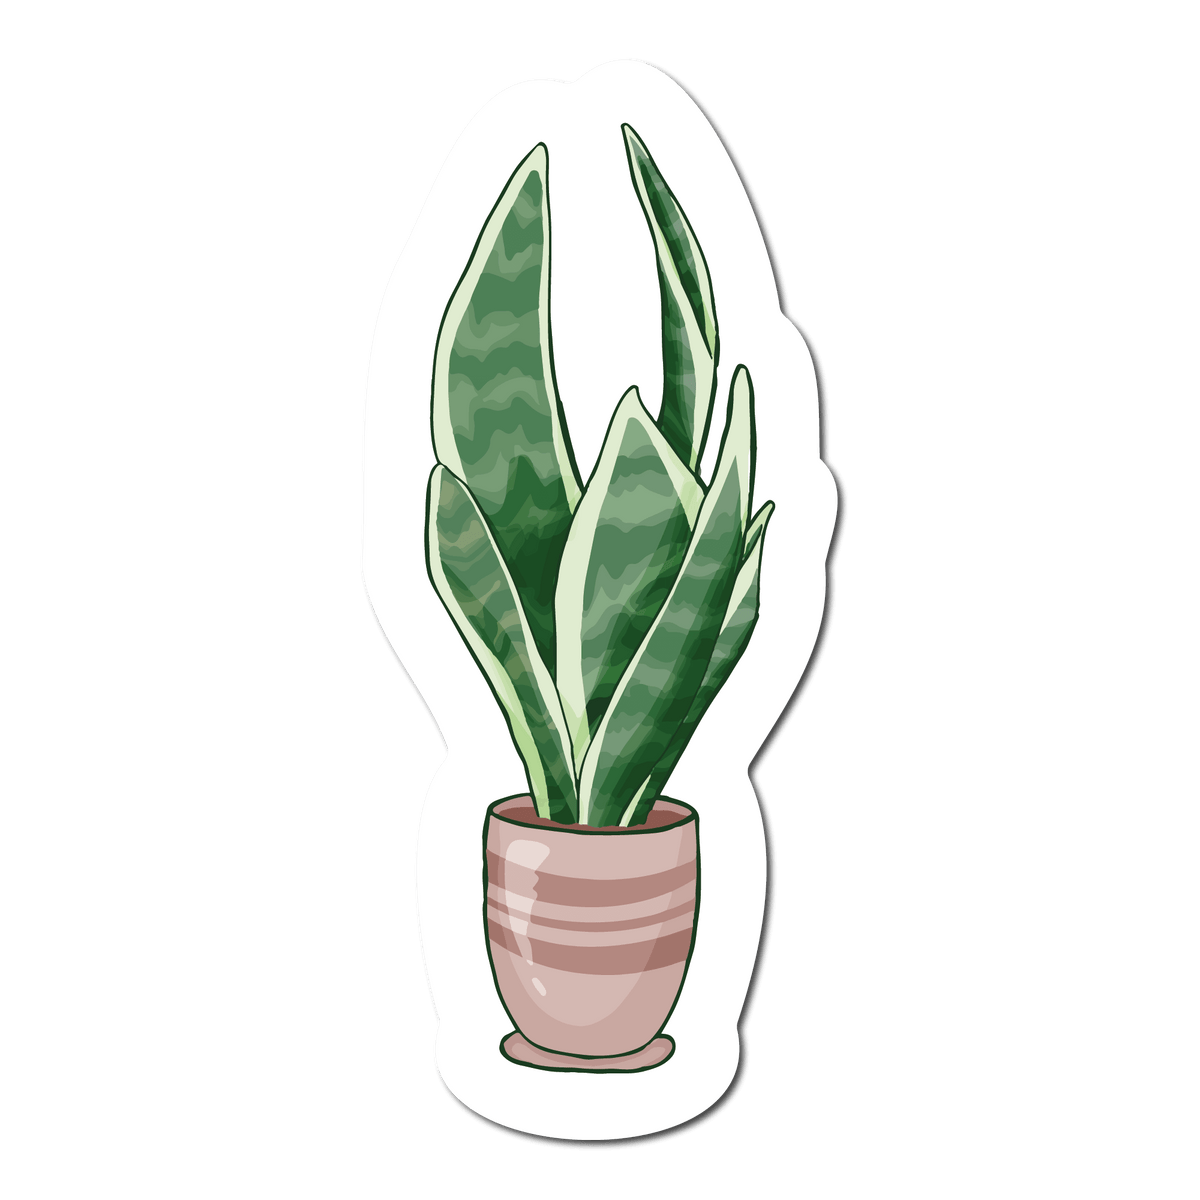 Small Sticker of a Snake Plant or Mother in Laws Tongue